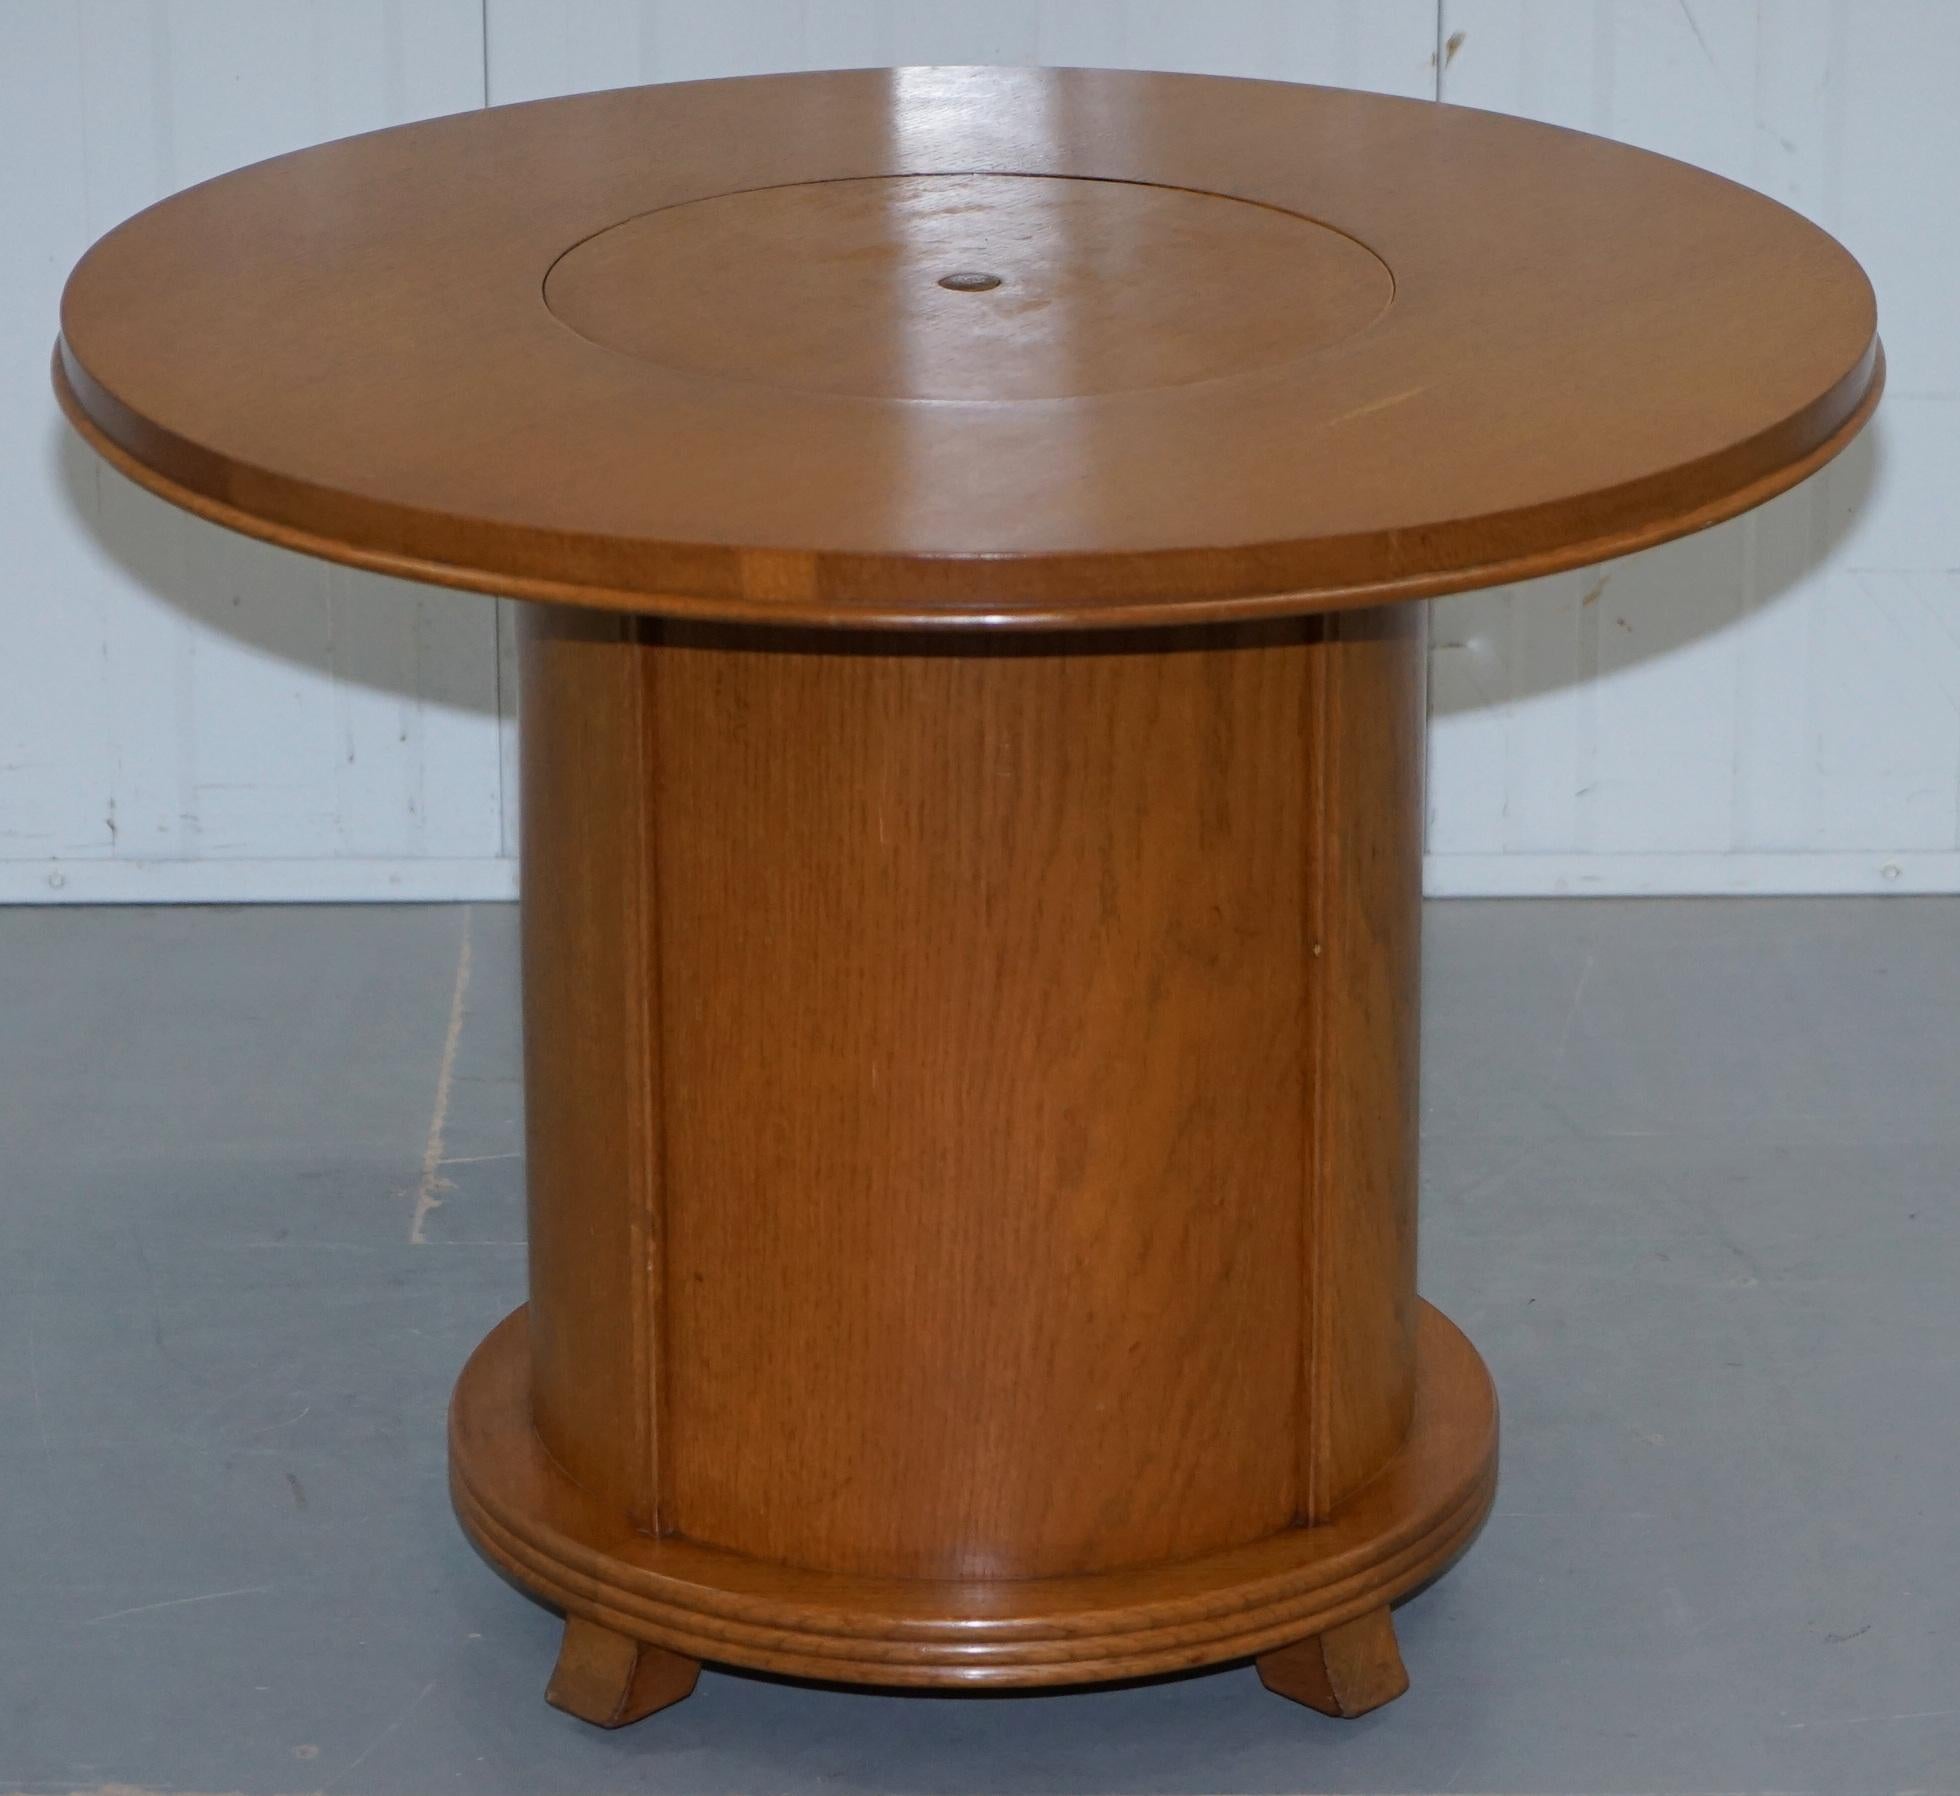 We are delighted to offer for sale this stunning original Art Deco 1930s walnut cocktail table with central rising drinks section.

A very good looking and well made decorative piece, you simply push the middle button and the drinks cabinet